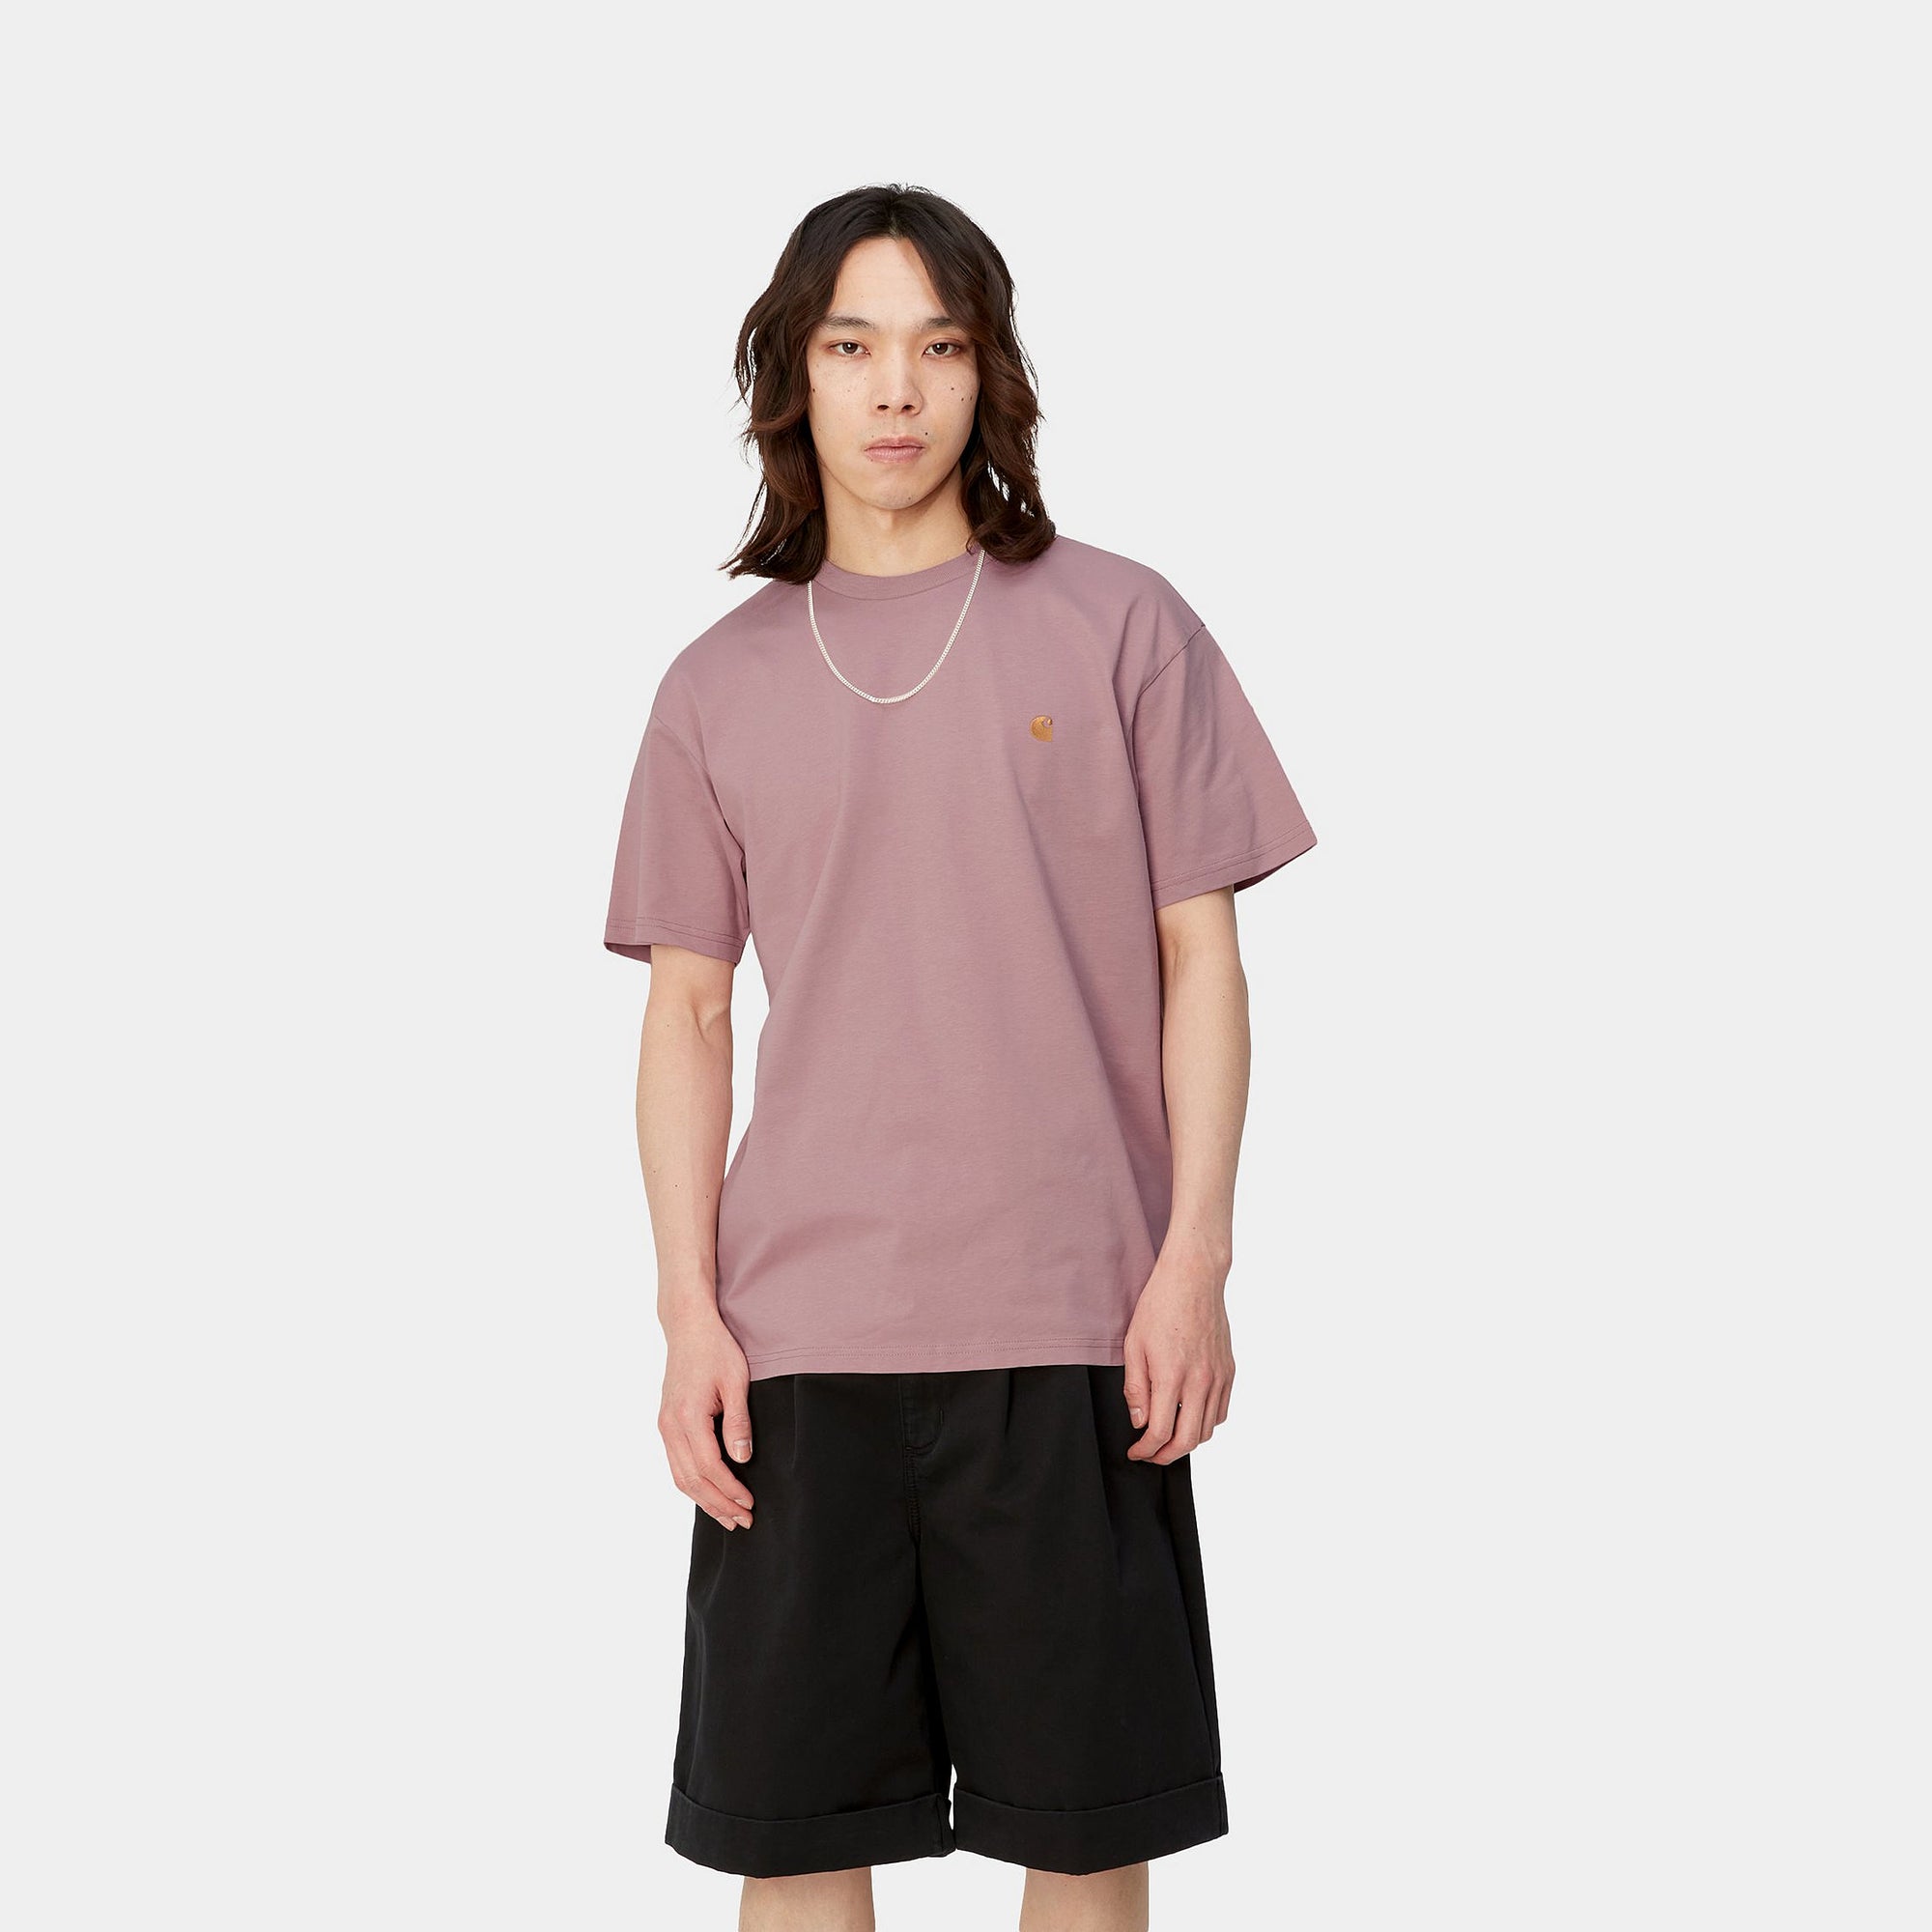 Carhartt WIP S/S Chase T-Shirt (glassy pink/gold) - Blue Mountain Store